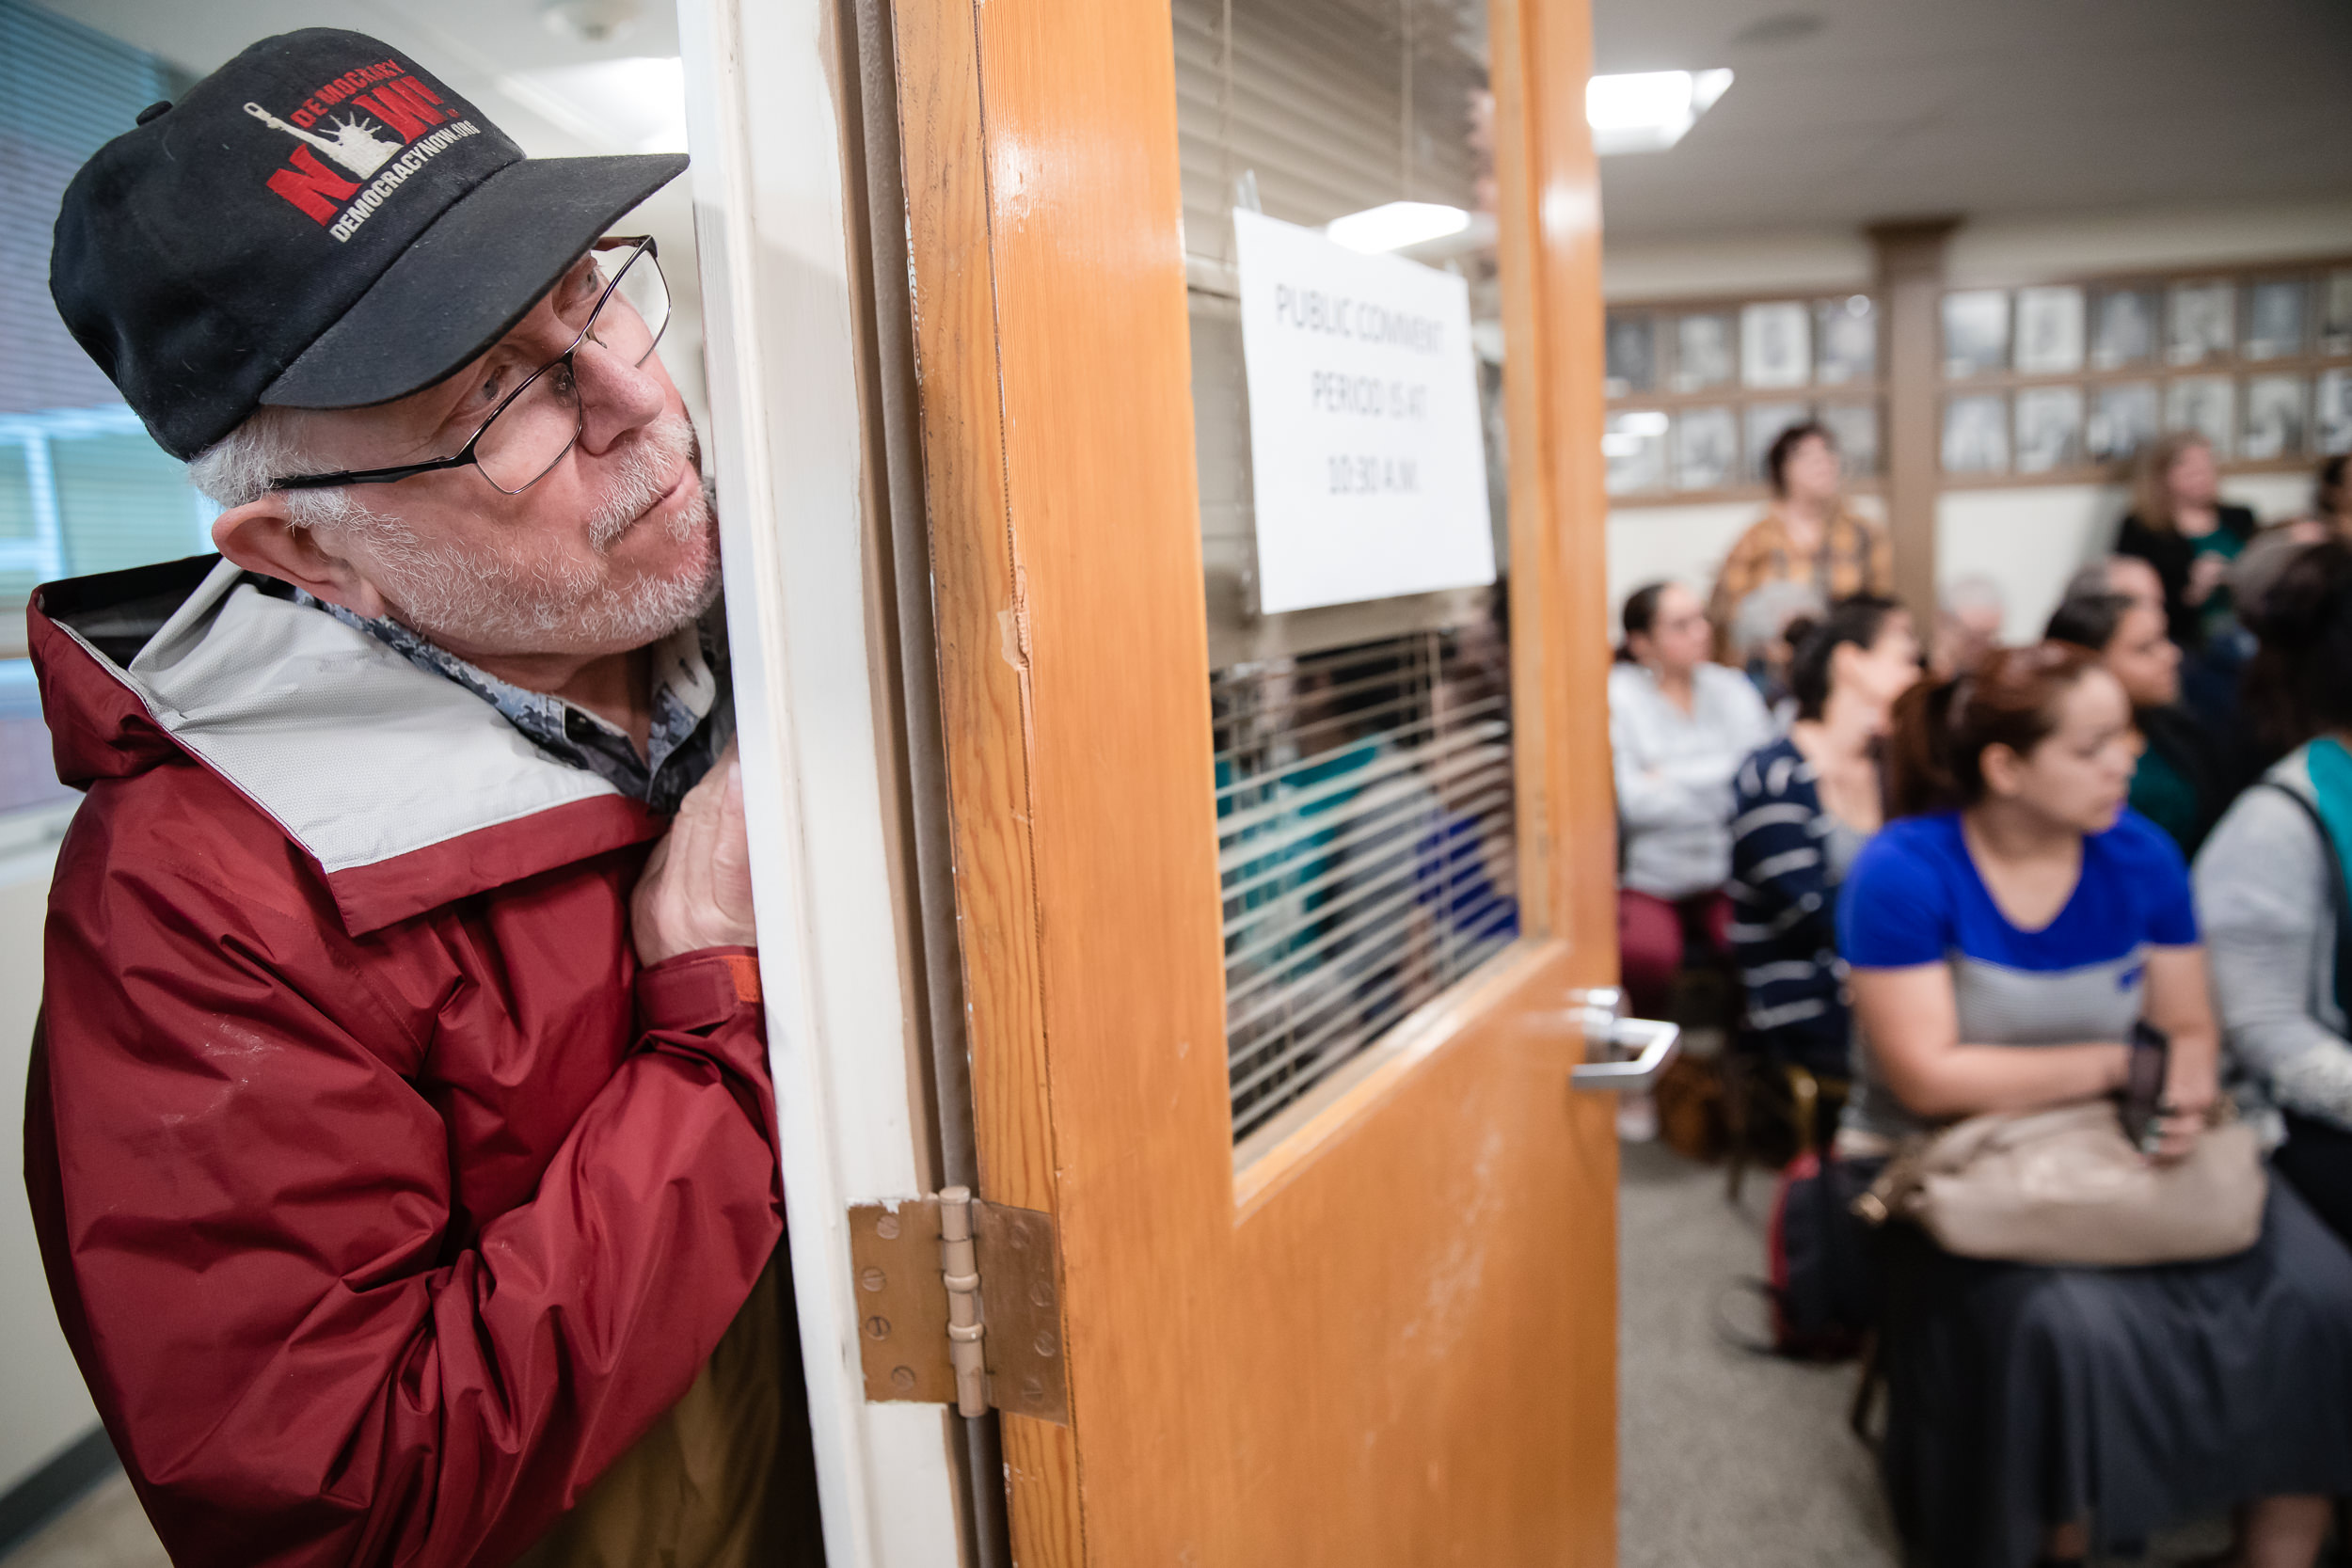 Steve Parker, with the Spokane Immigrants Rights Coalition, peeks around a doorway to listen to comments